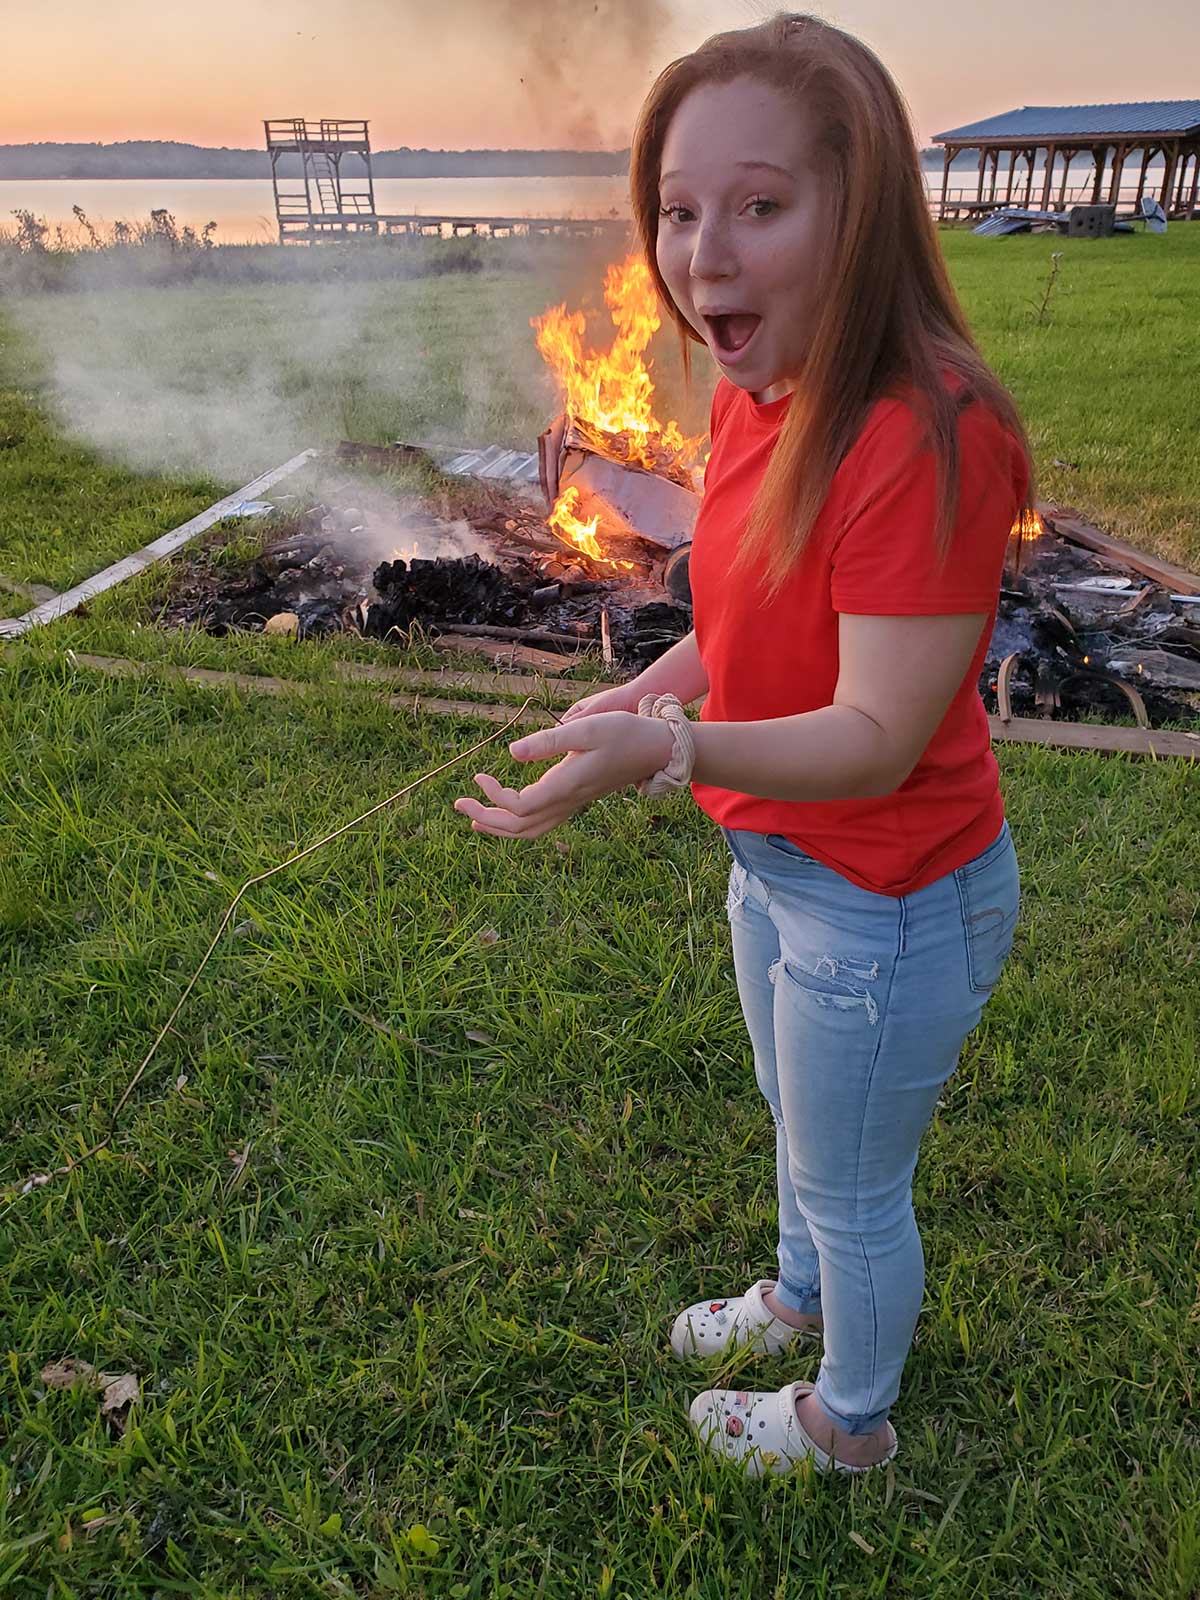 photo of girl with amused expression standing in front of fire